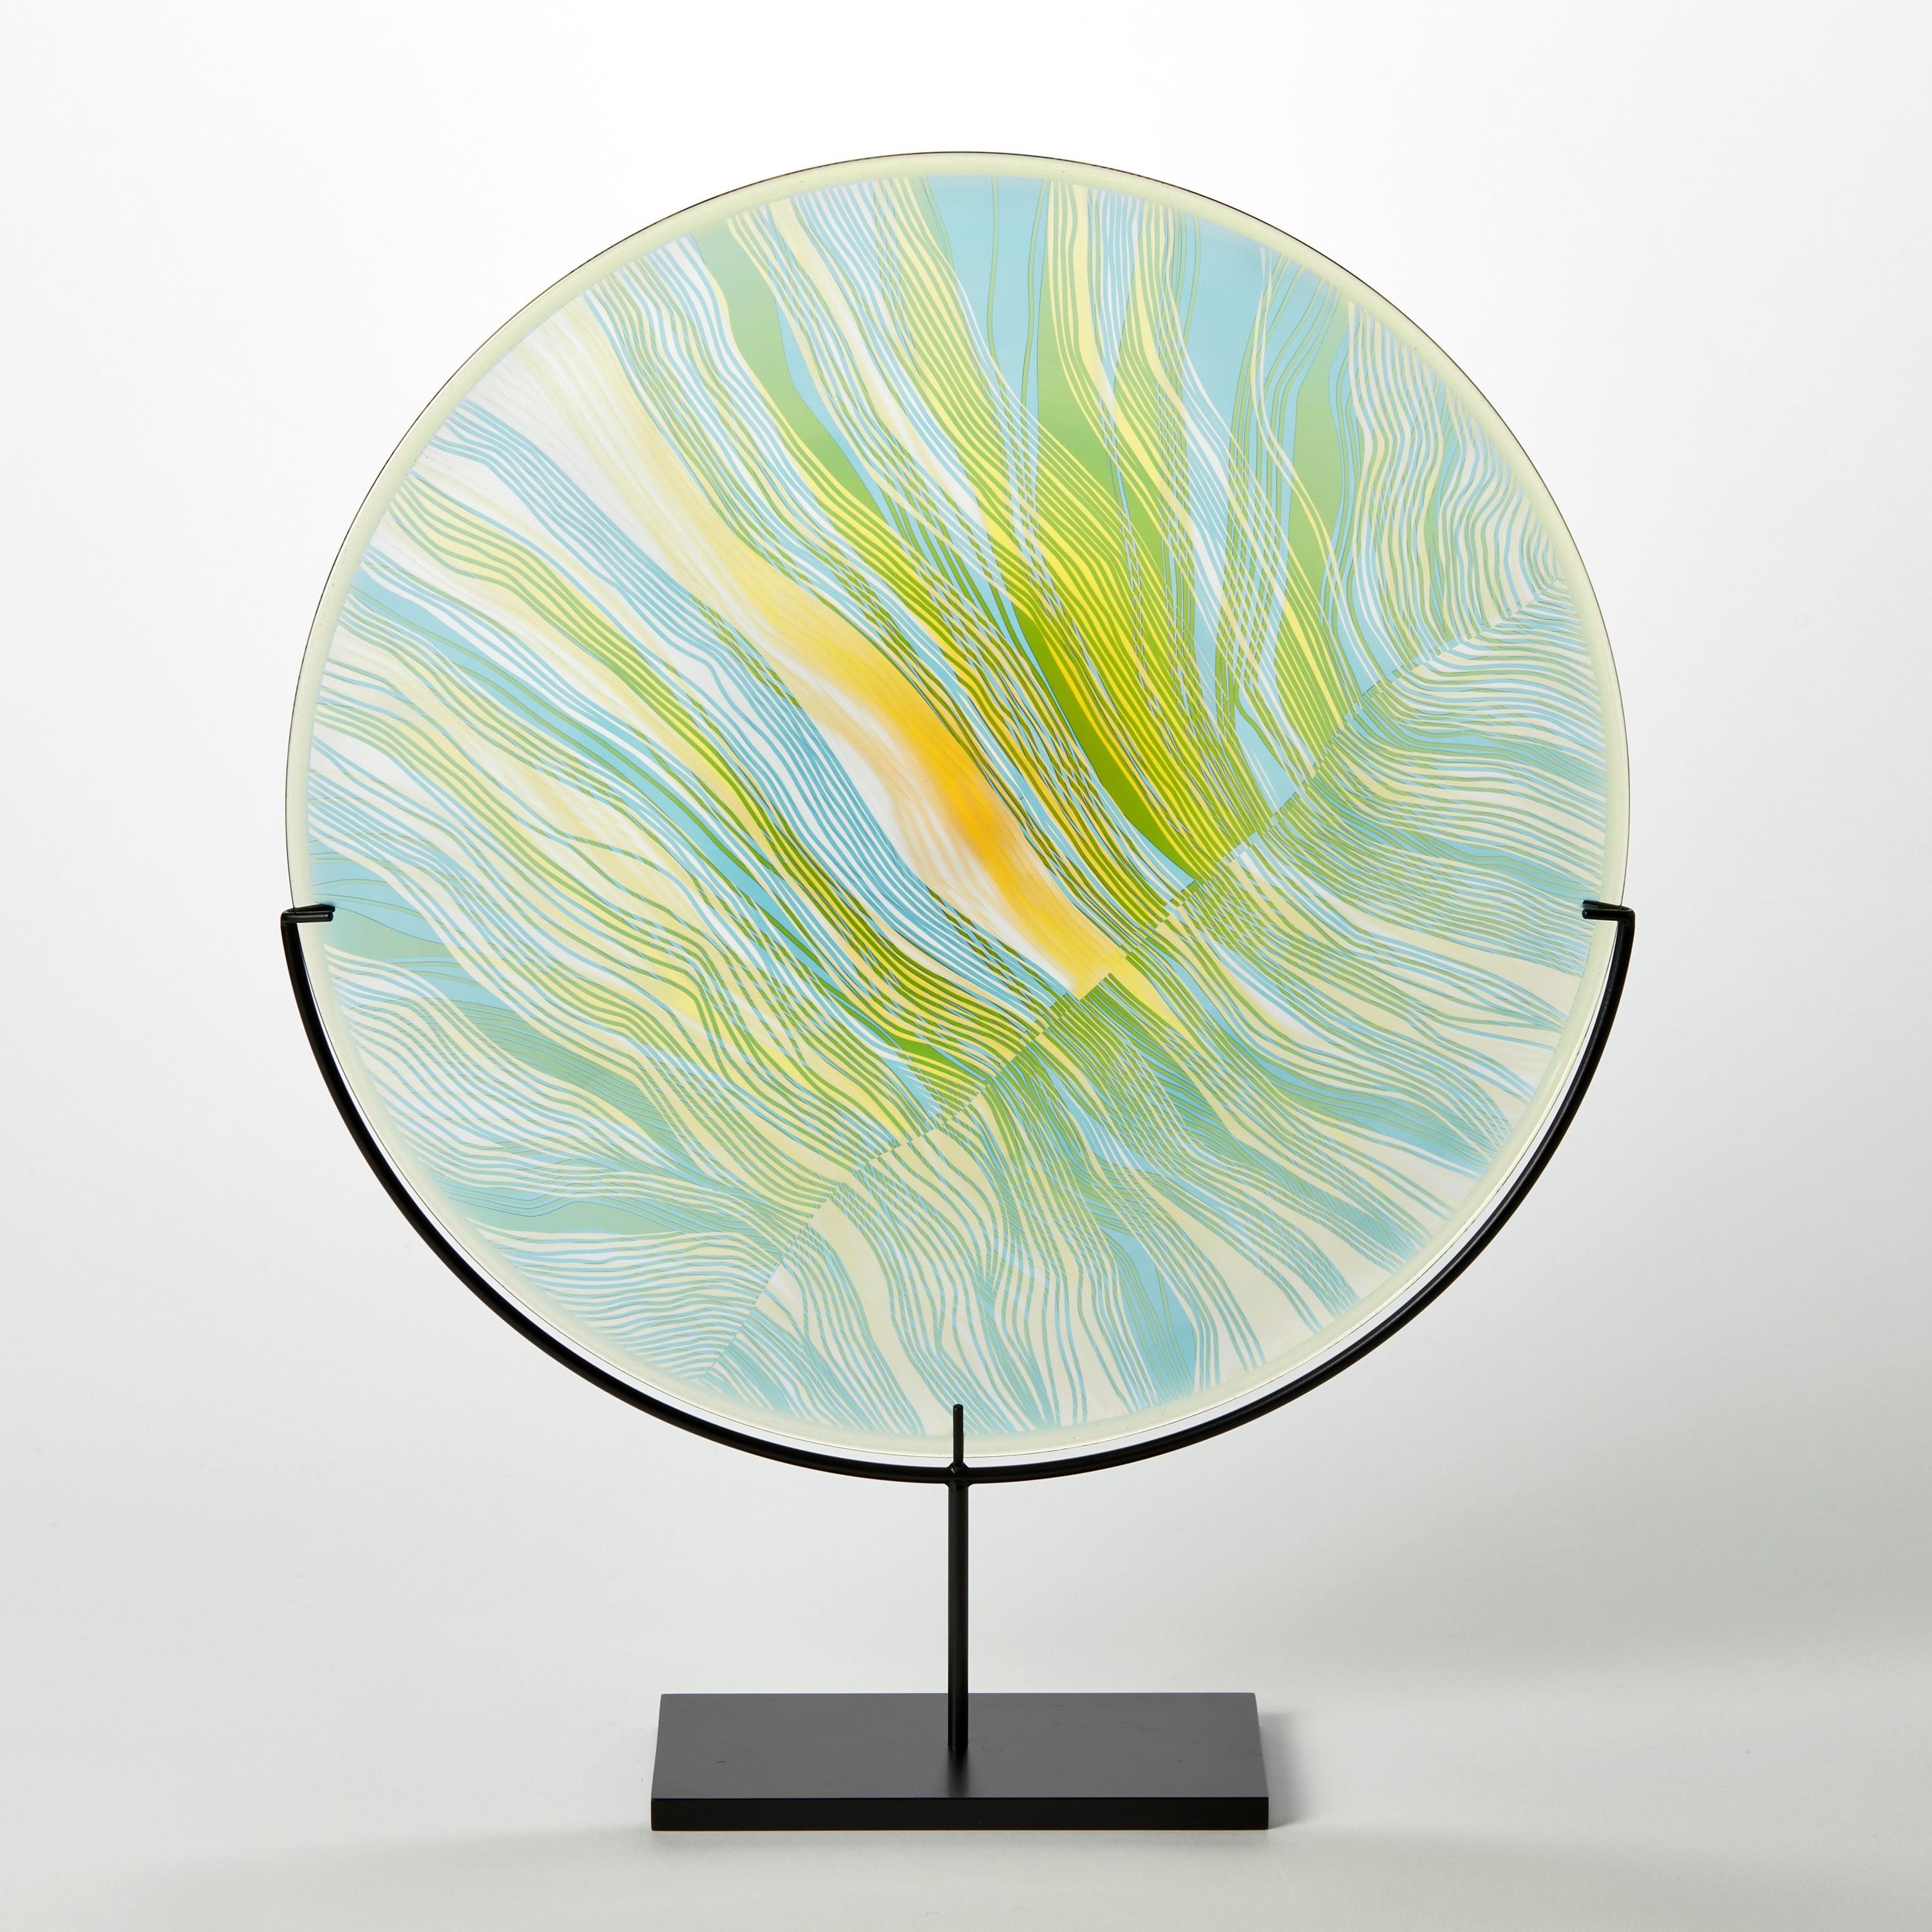 British Solar Storm Sky Blue over Gold, a contemporary cut glass artwork by Kate Jones For Sale